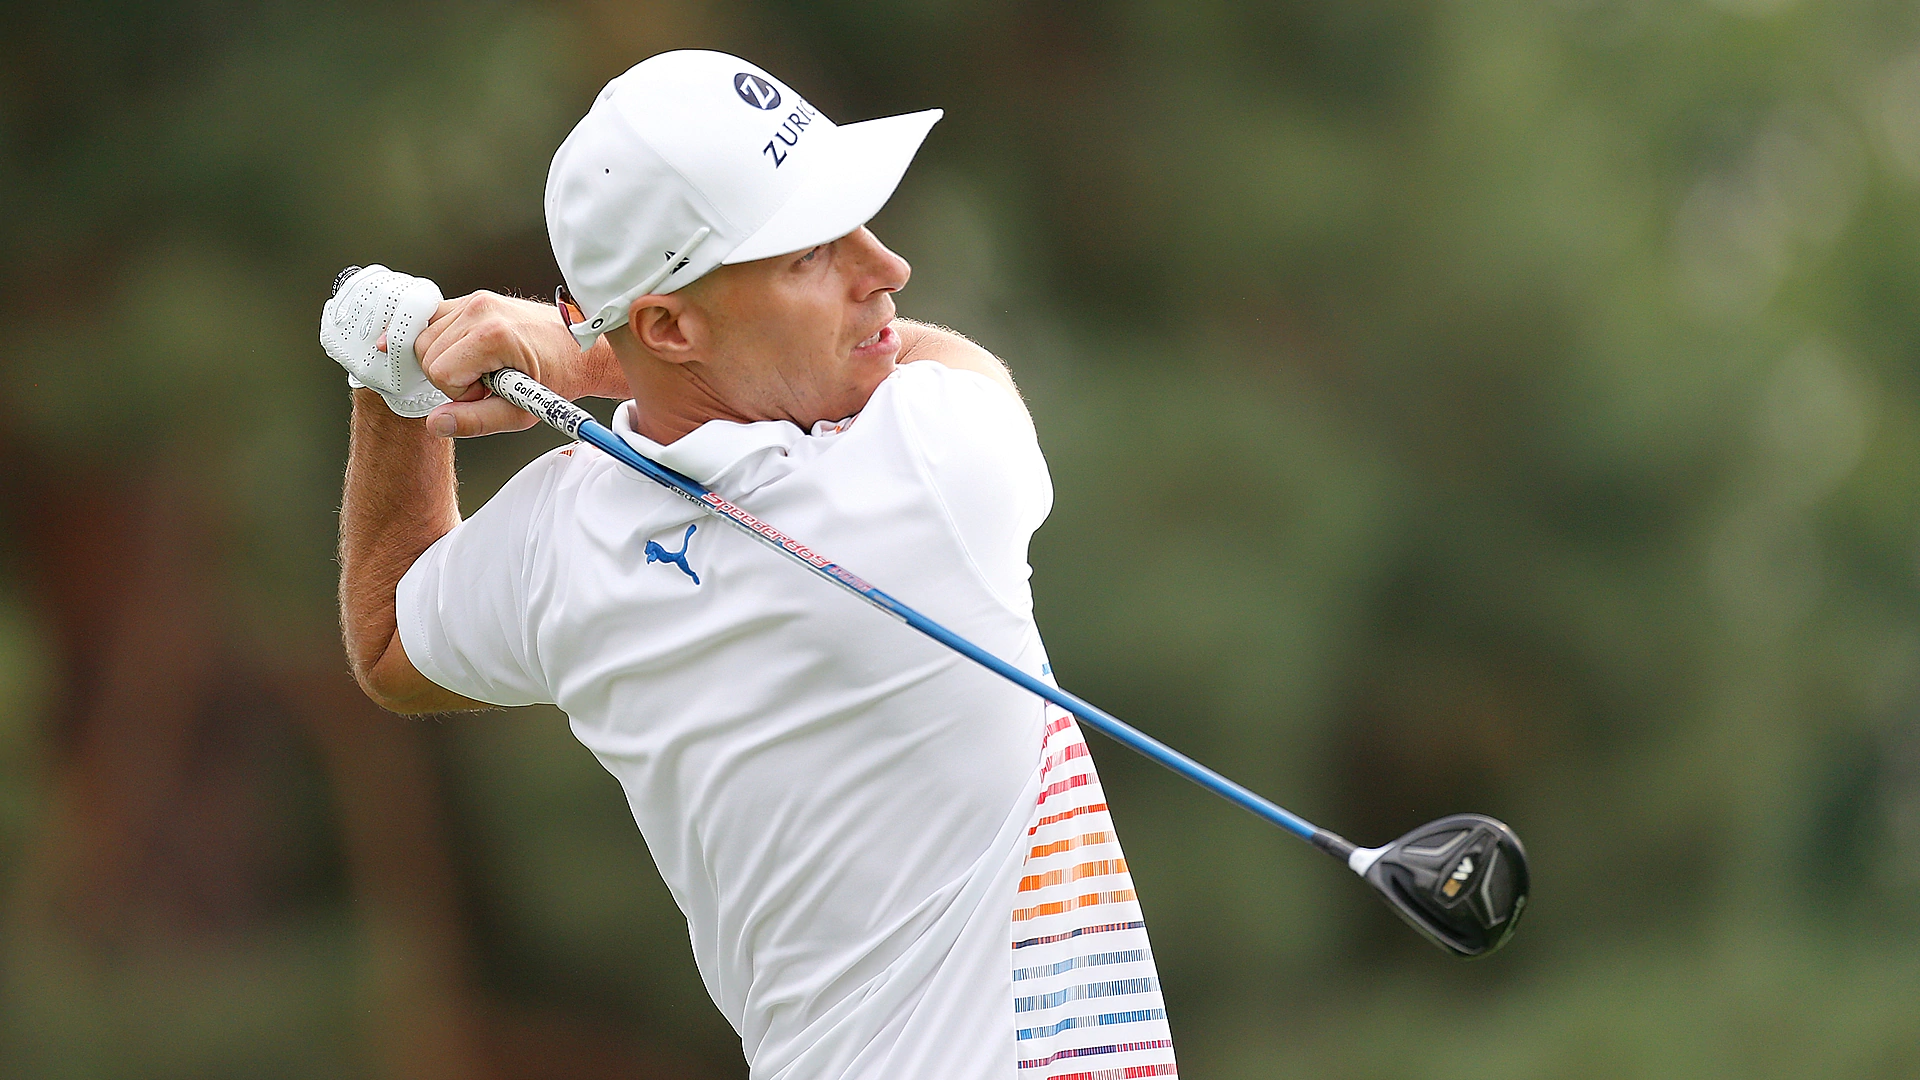 Crane DQ'd with two four-shot penalties at Boise Open